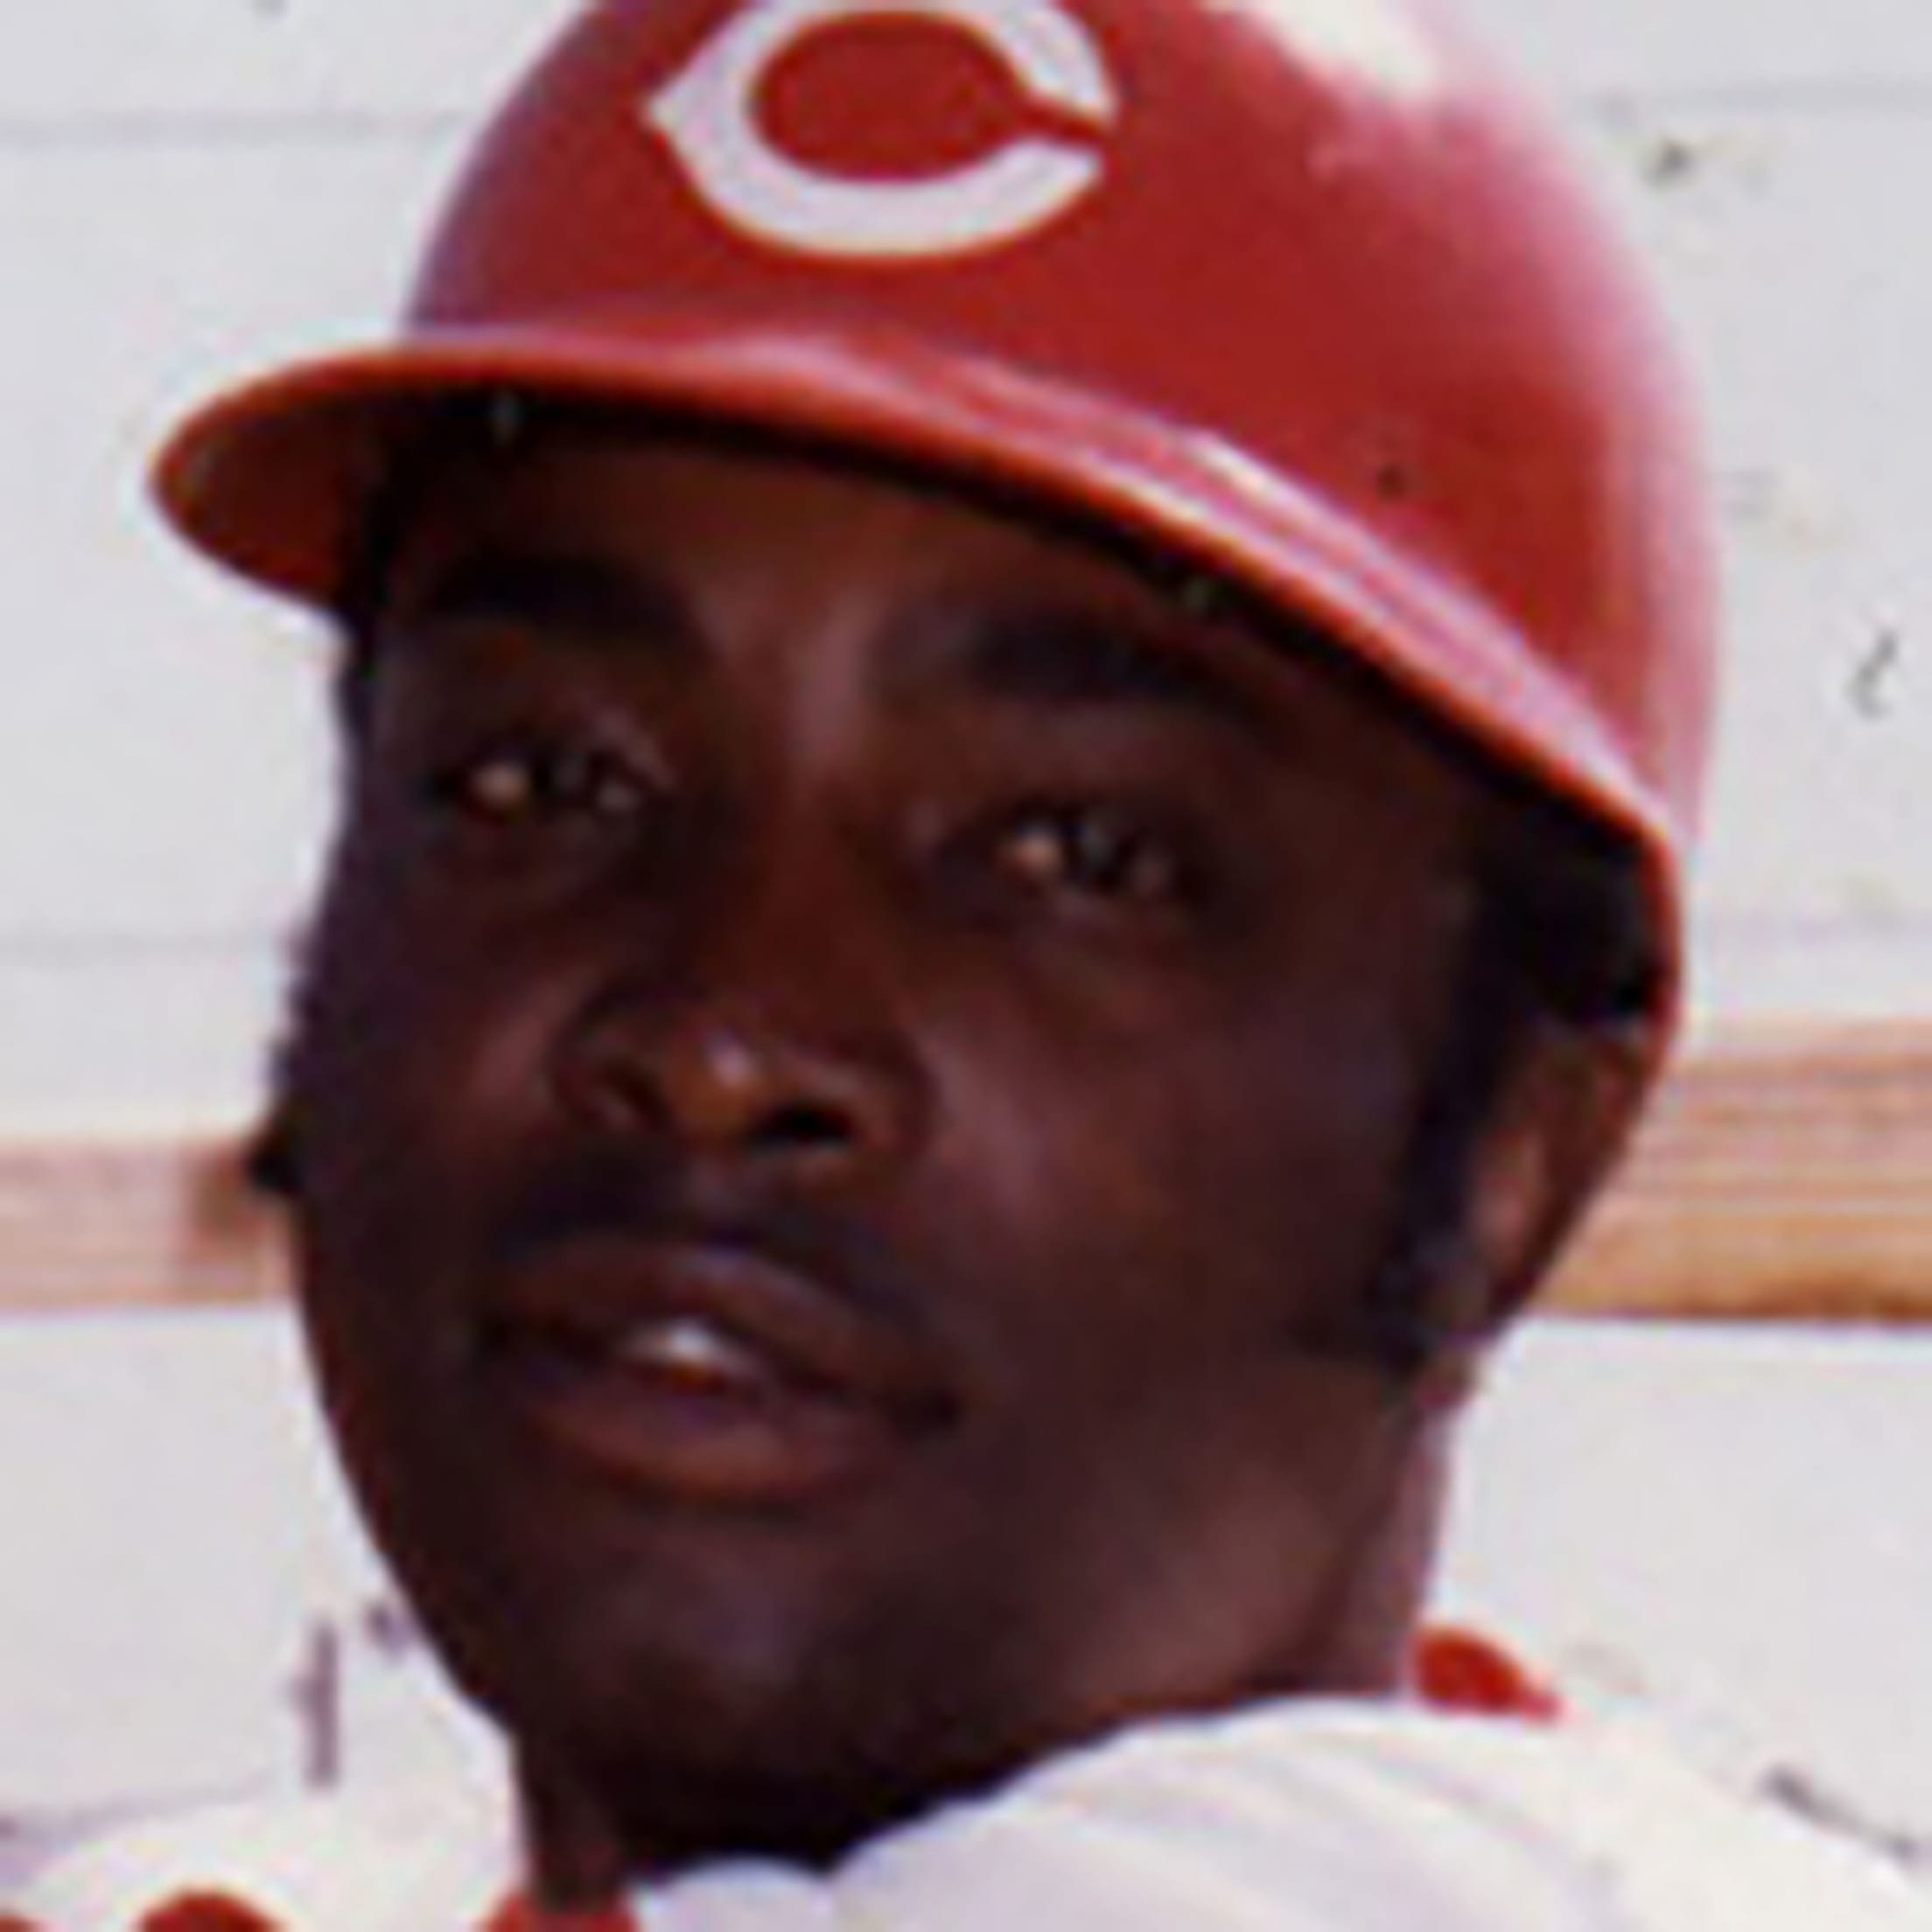 On this date in Reds history, 4/13/1964, the names of players are